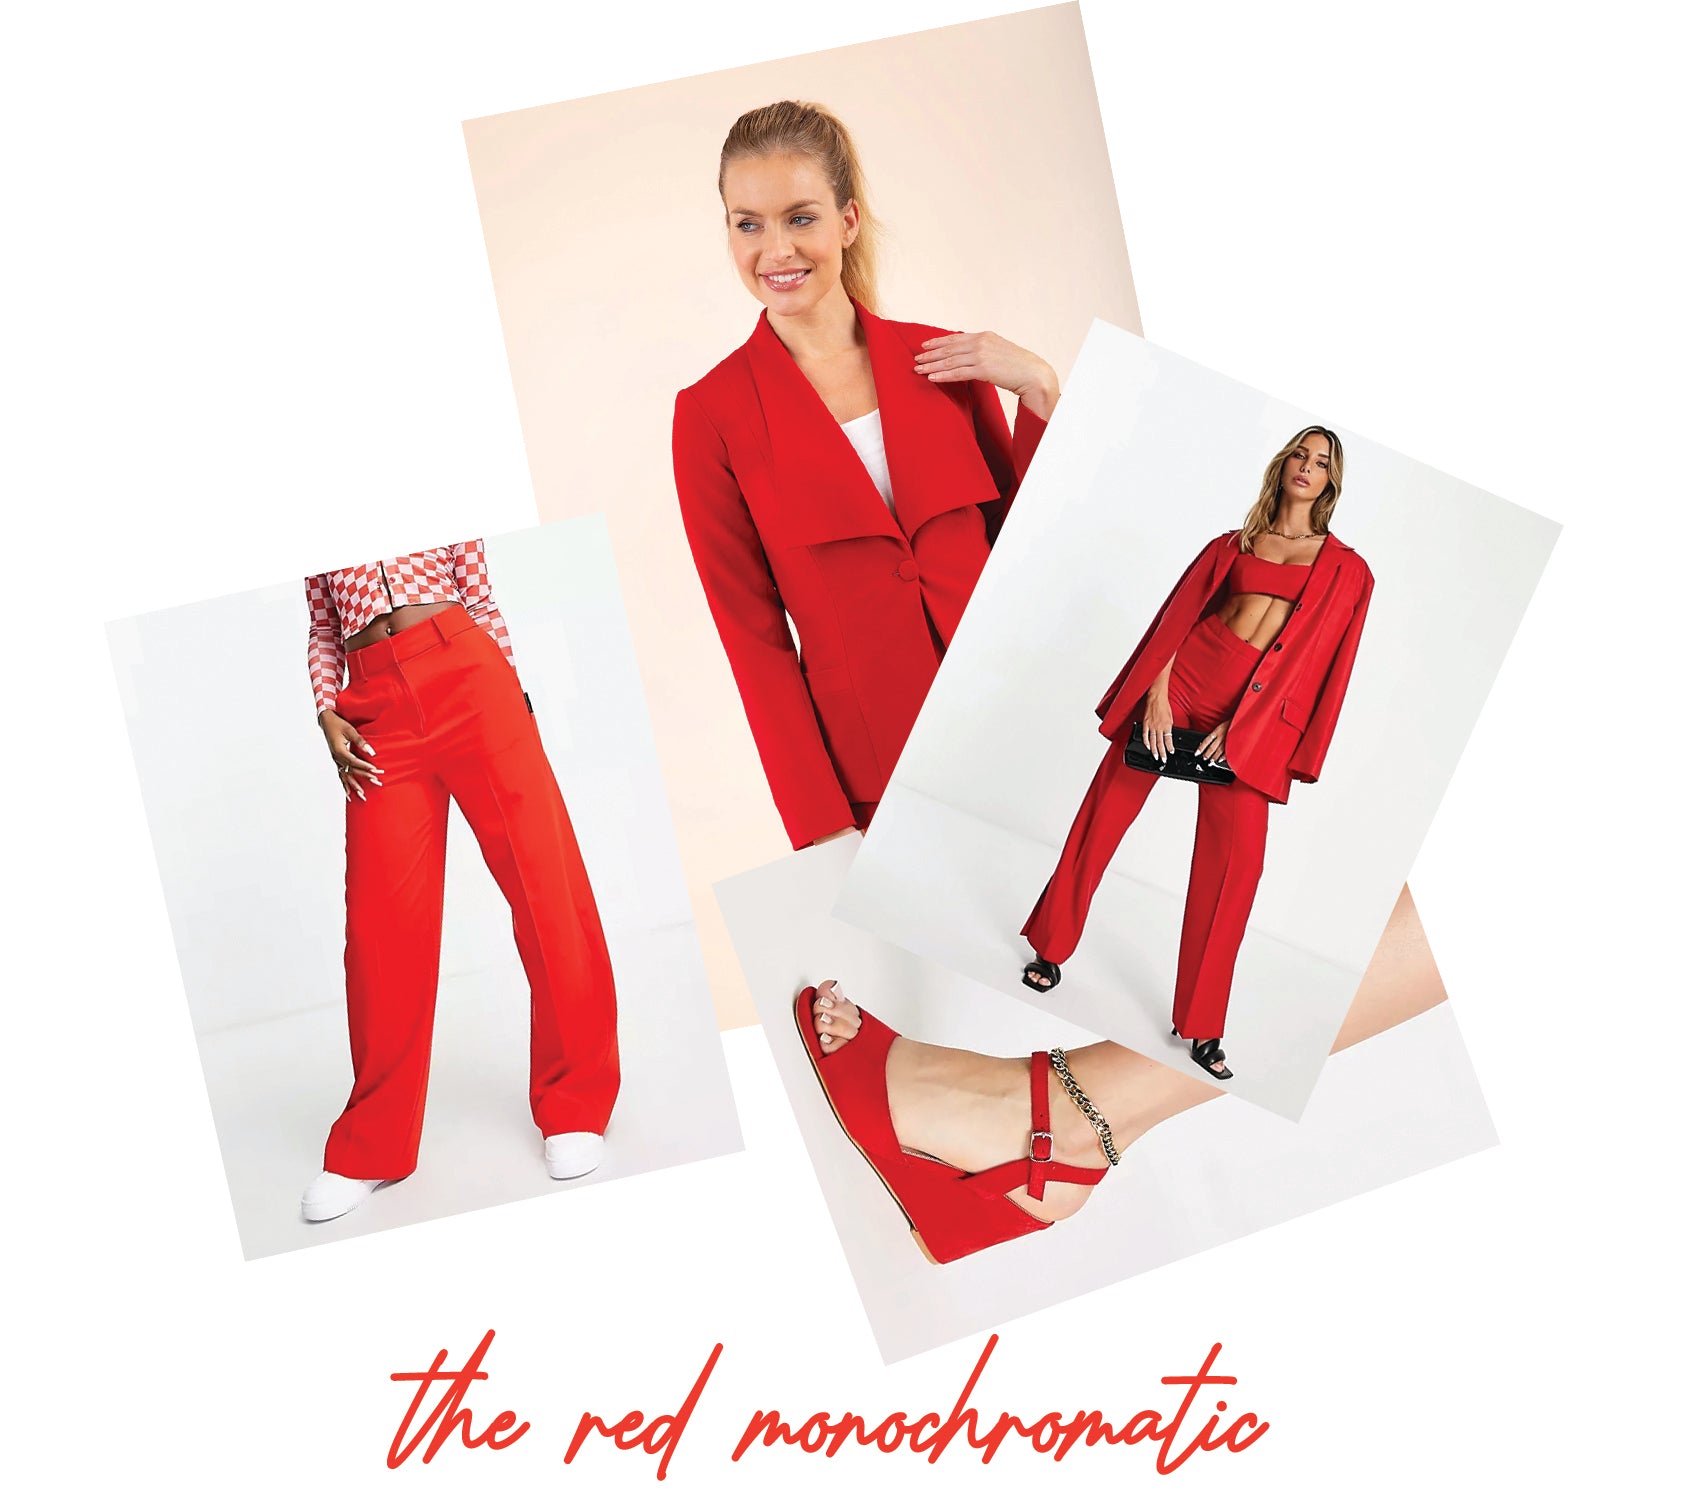 a detailed collage image showing a pair of tied sandals, a divacatwalk jacket, long wide leg trousers and a bralette - all in different shades of red.